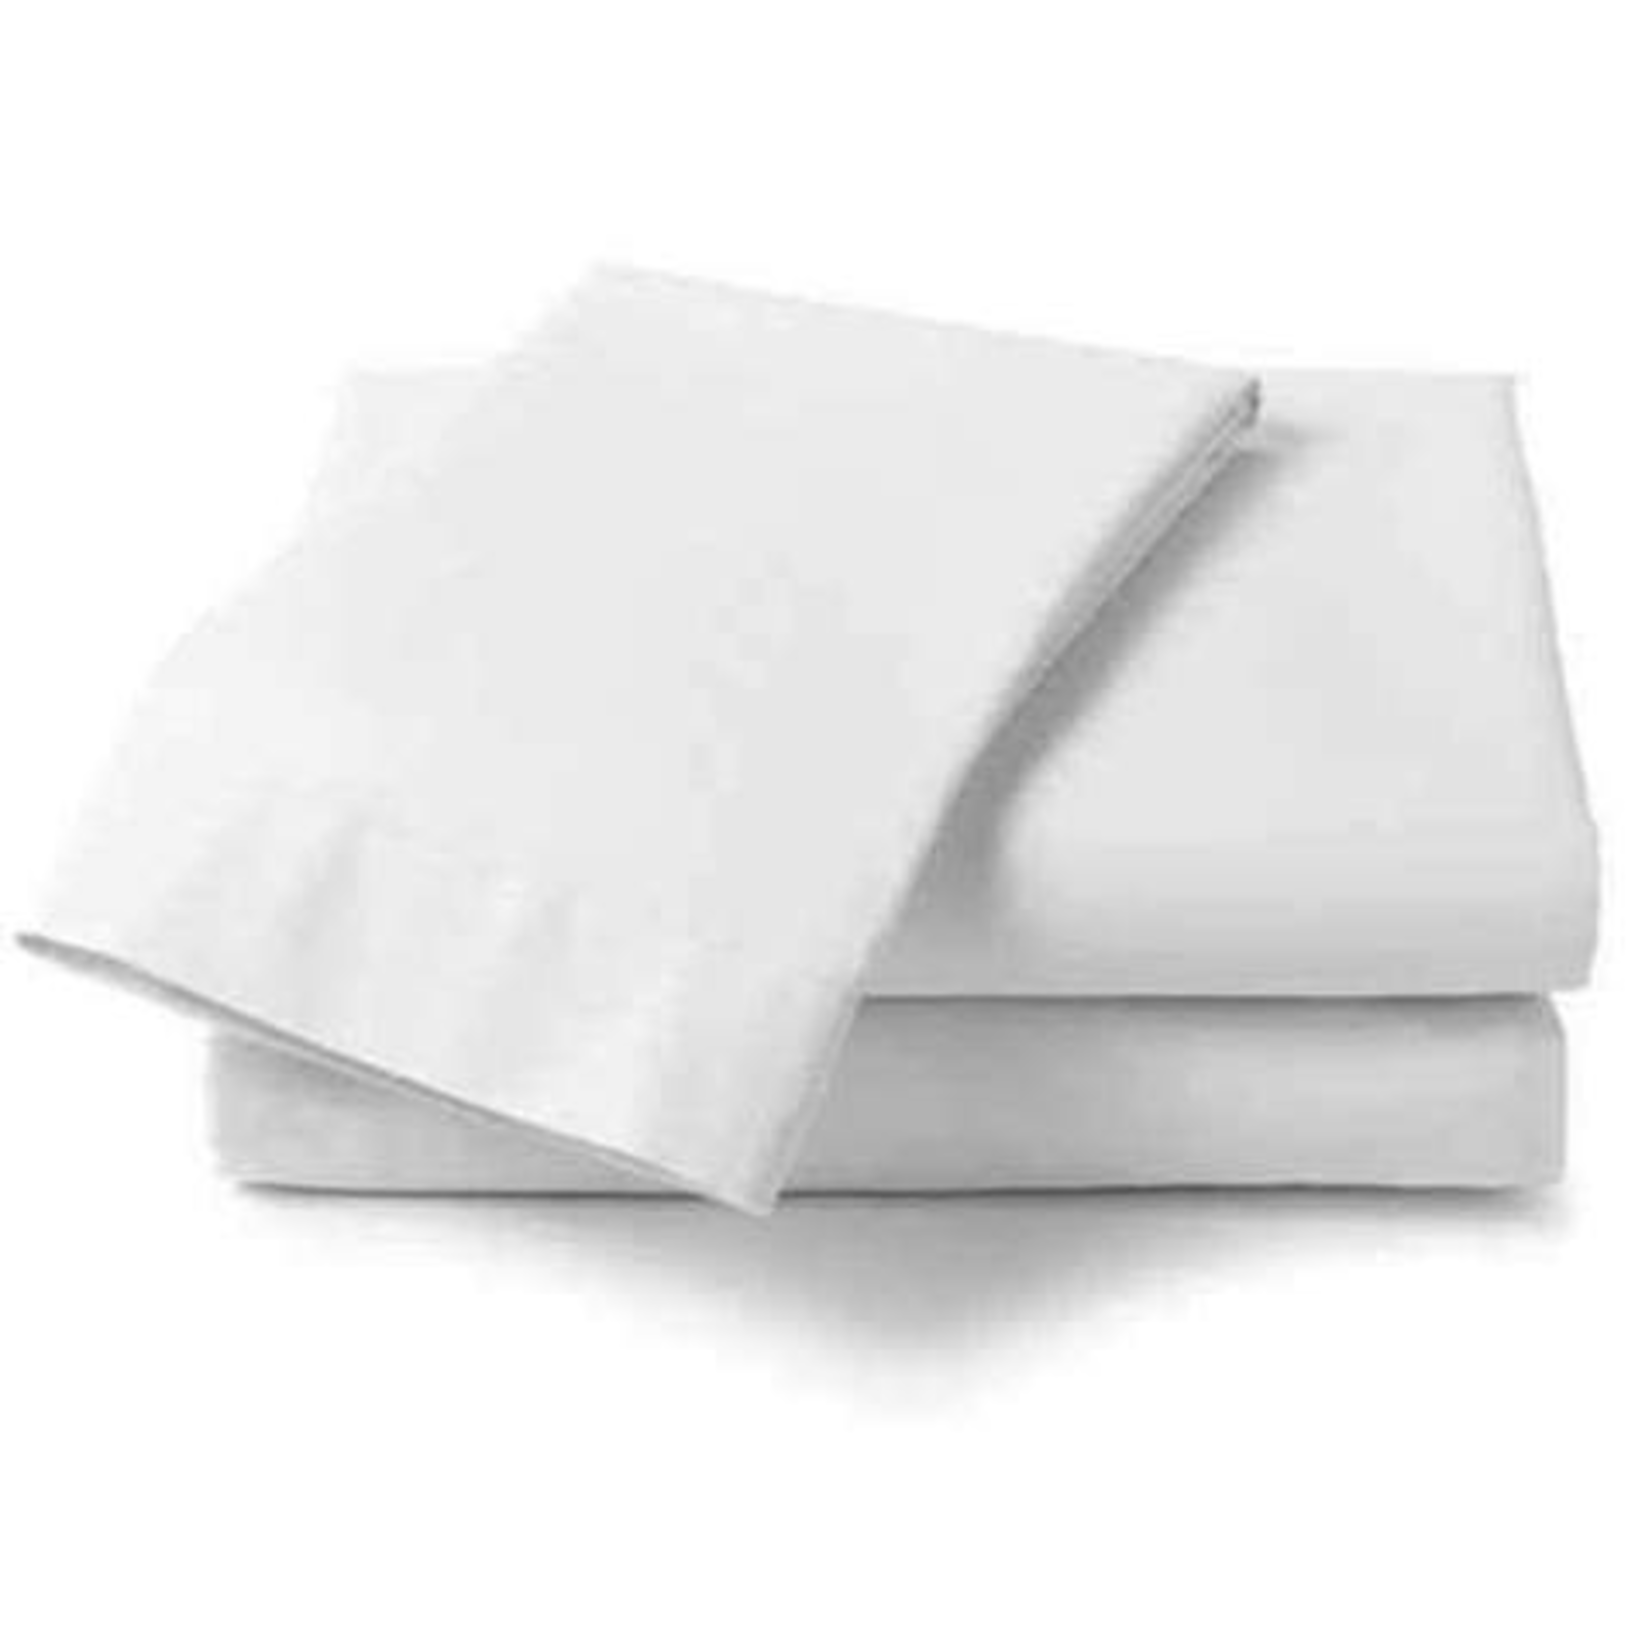 Cuddle Down Percale Deluxe Pillowcase Pair, King, #92 Slate